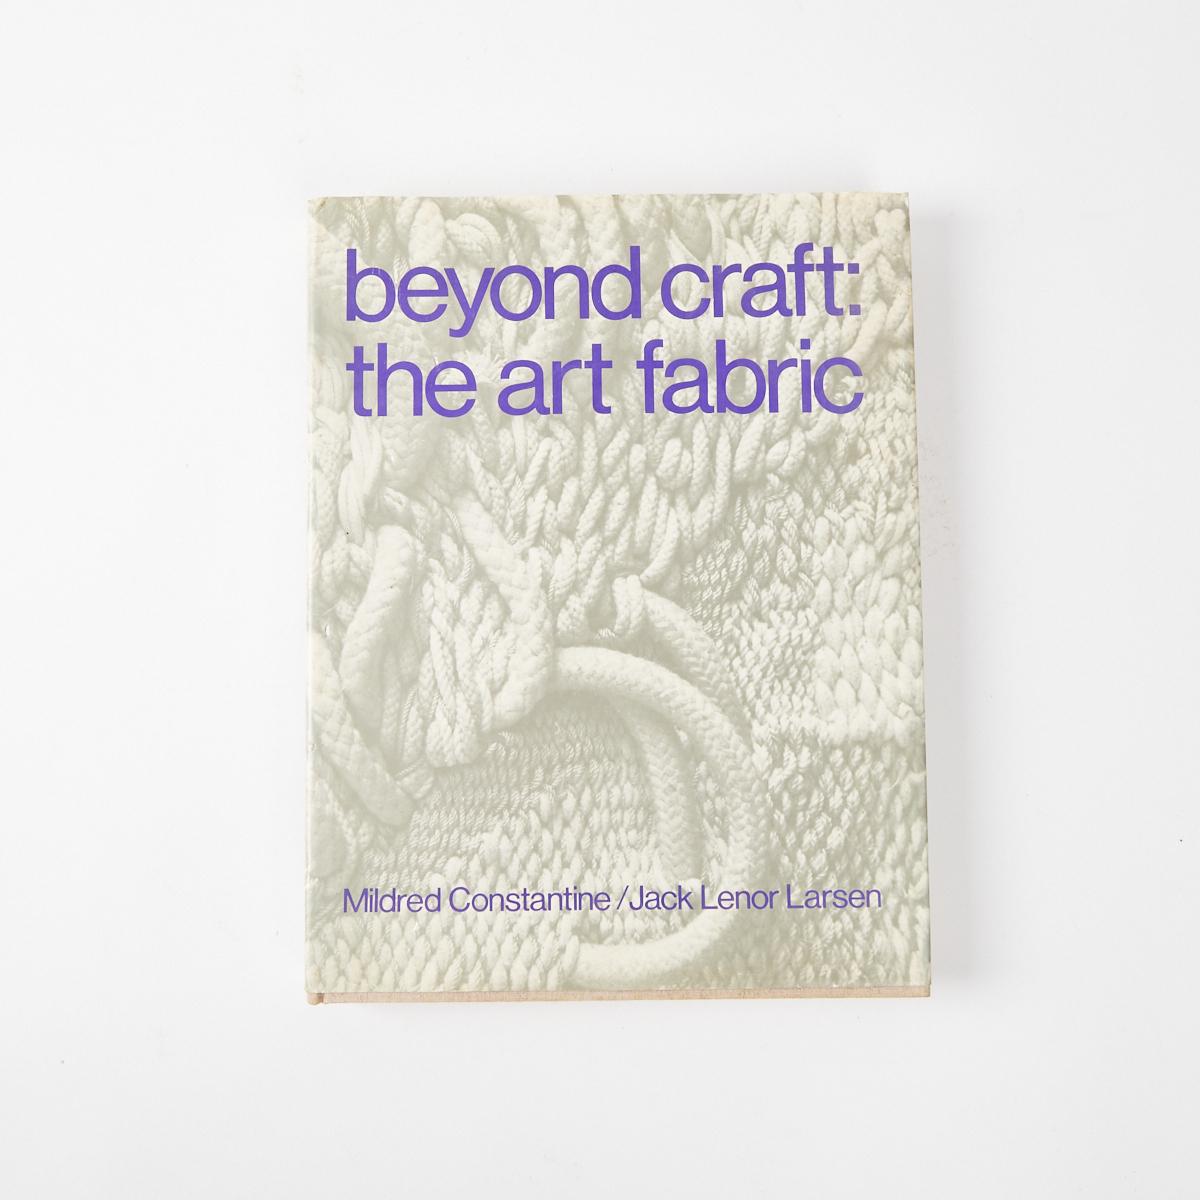 Beyond Craft: the Art Fabric by Mildred Constantine & Jack Lenor